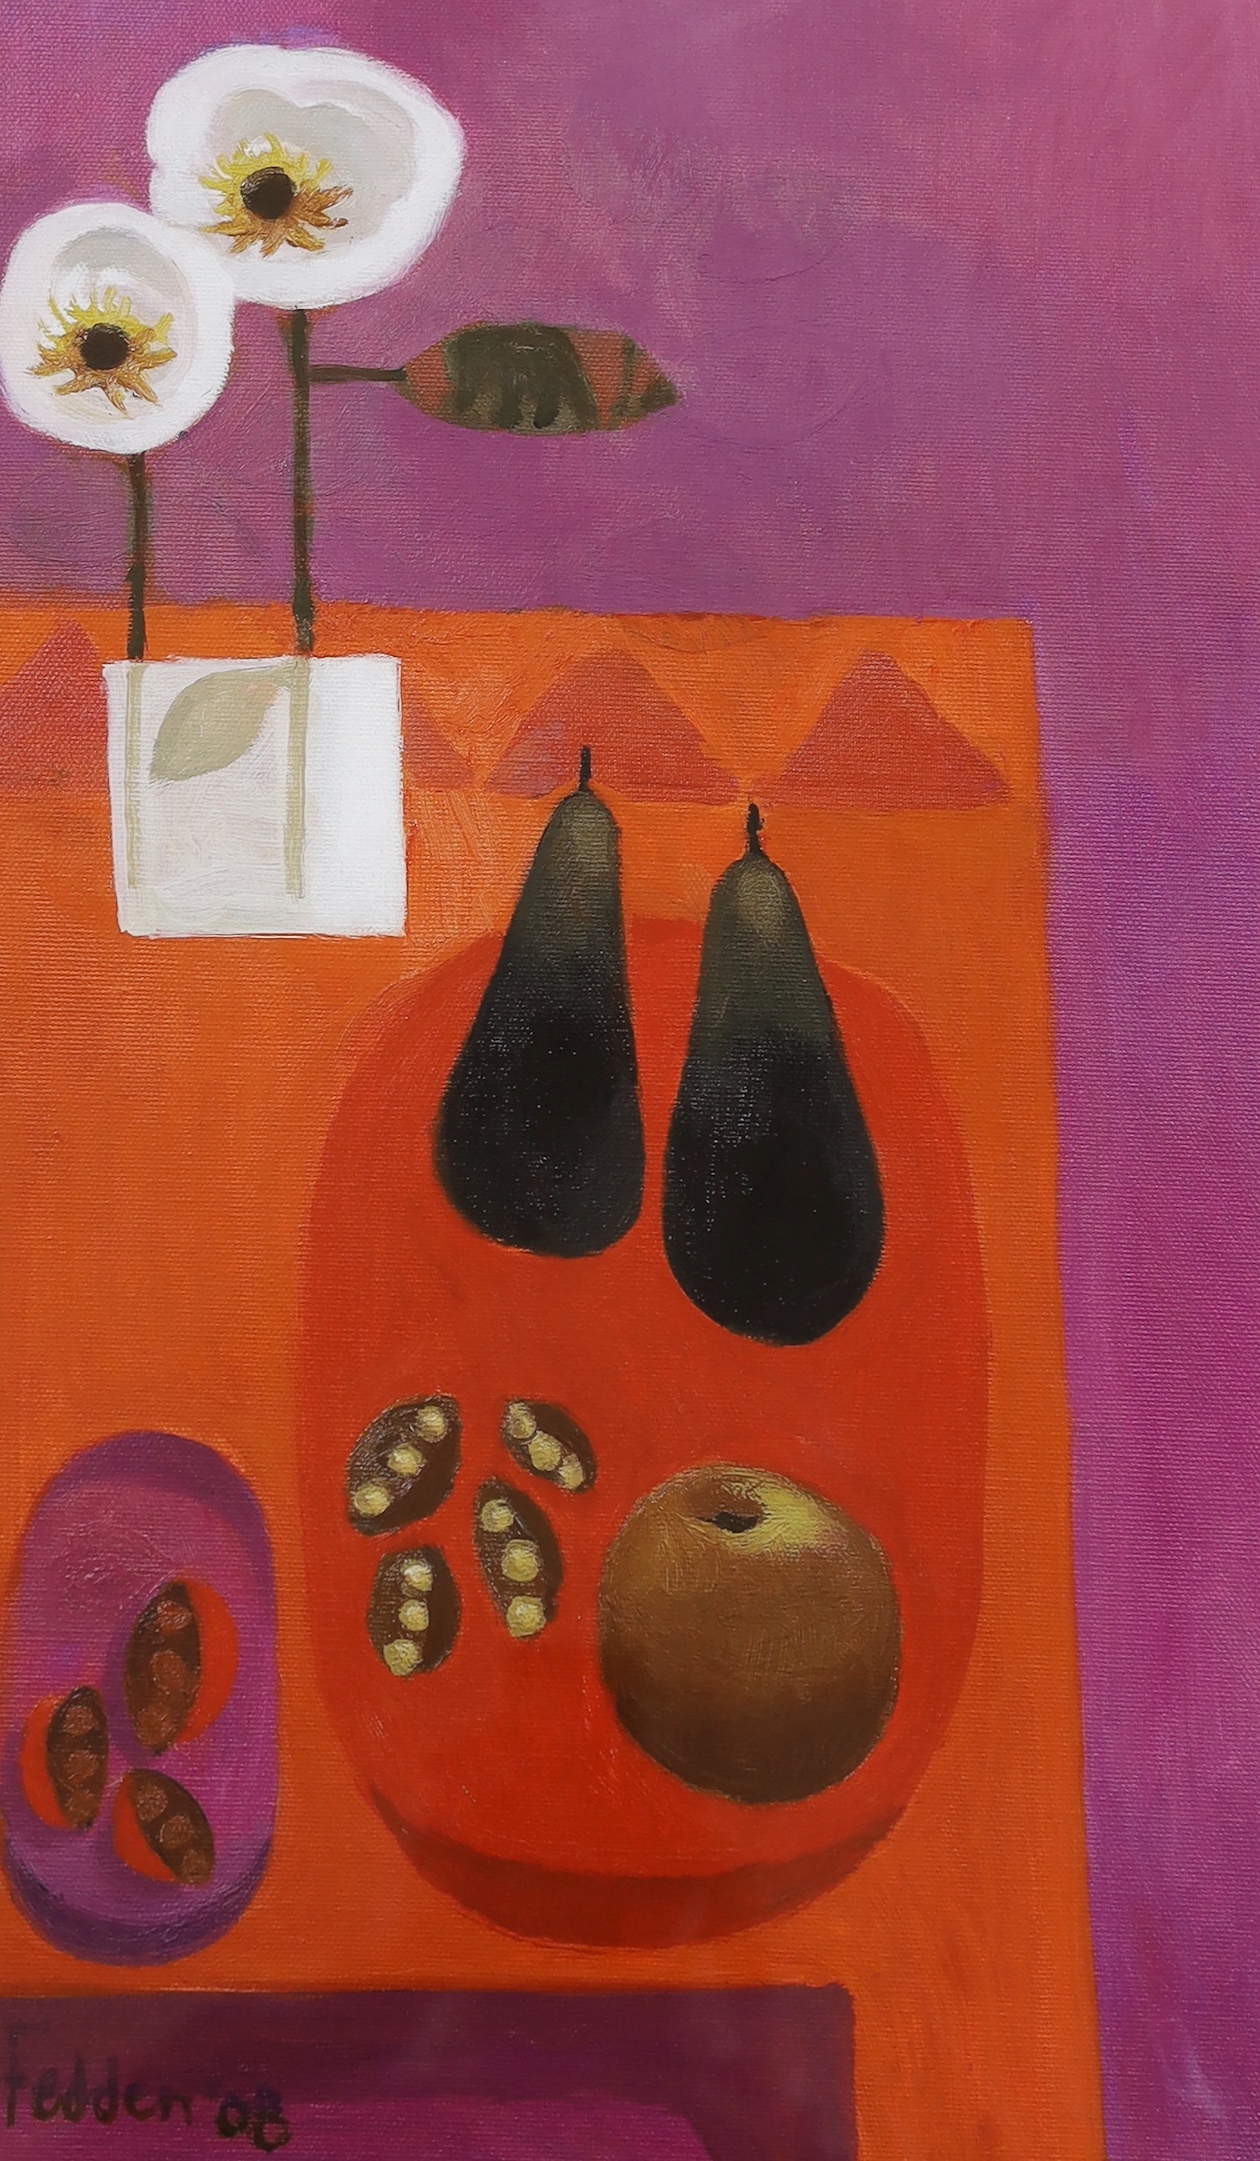 Mary Fedden (1915-2012), giclée print, 'Two Pears', limited edition 29/75, signed in pencil, 49 x 31cm